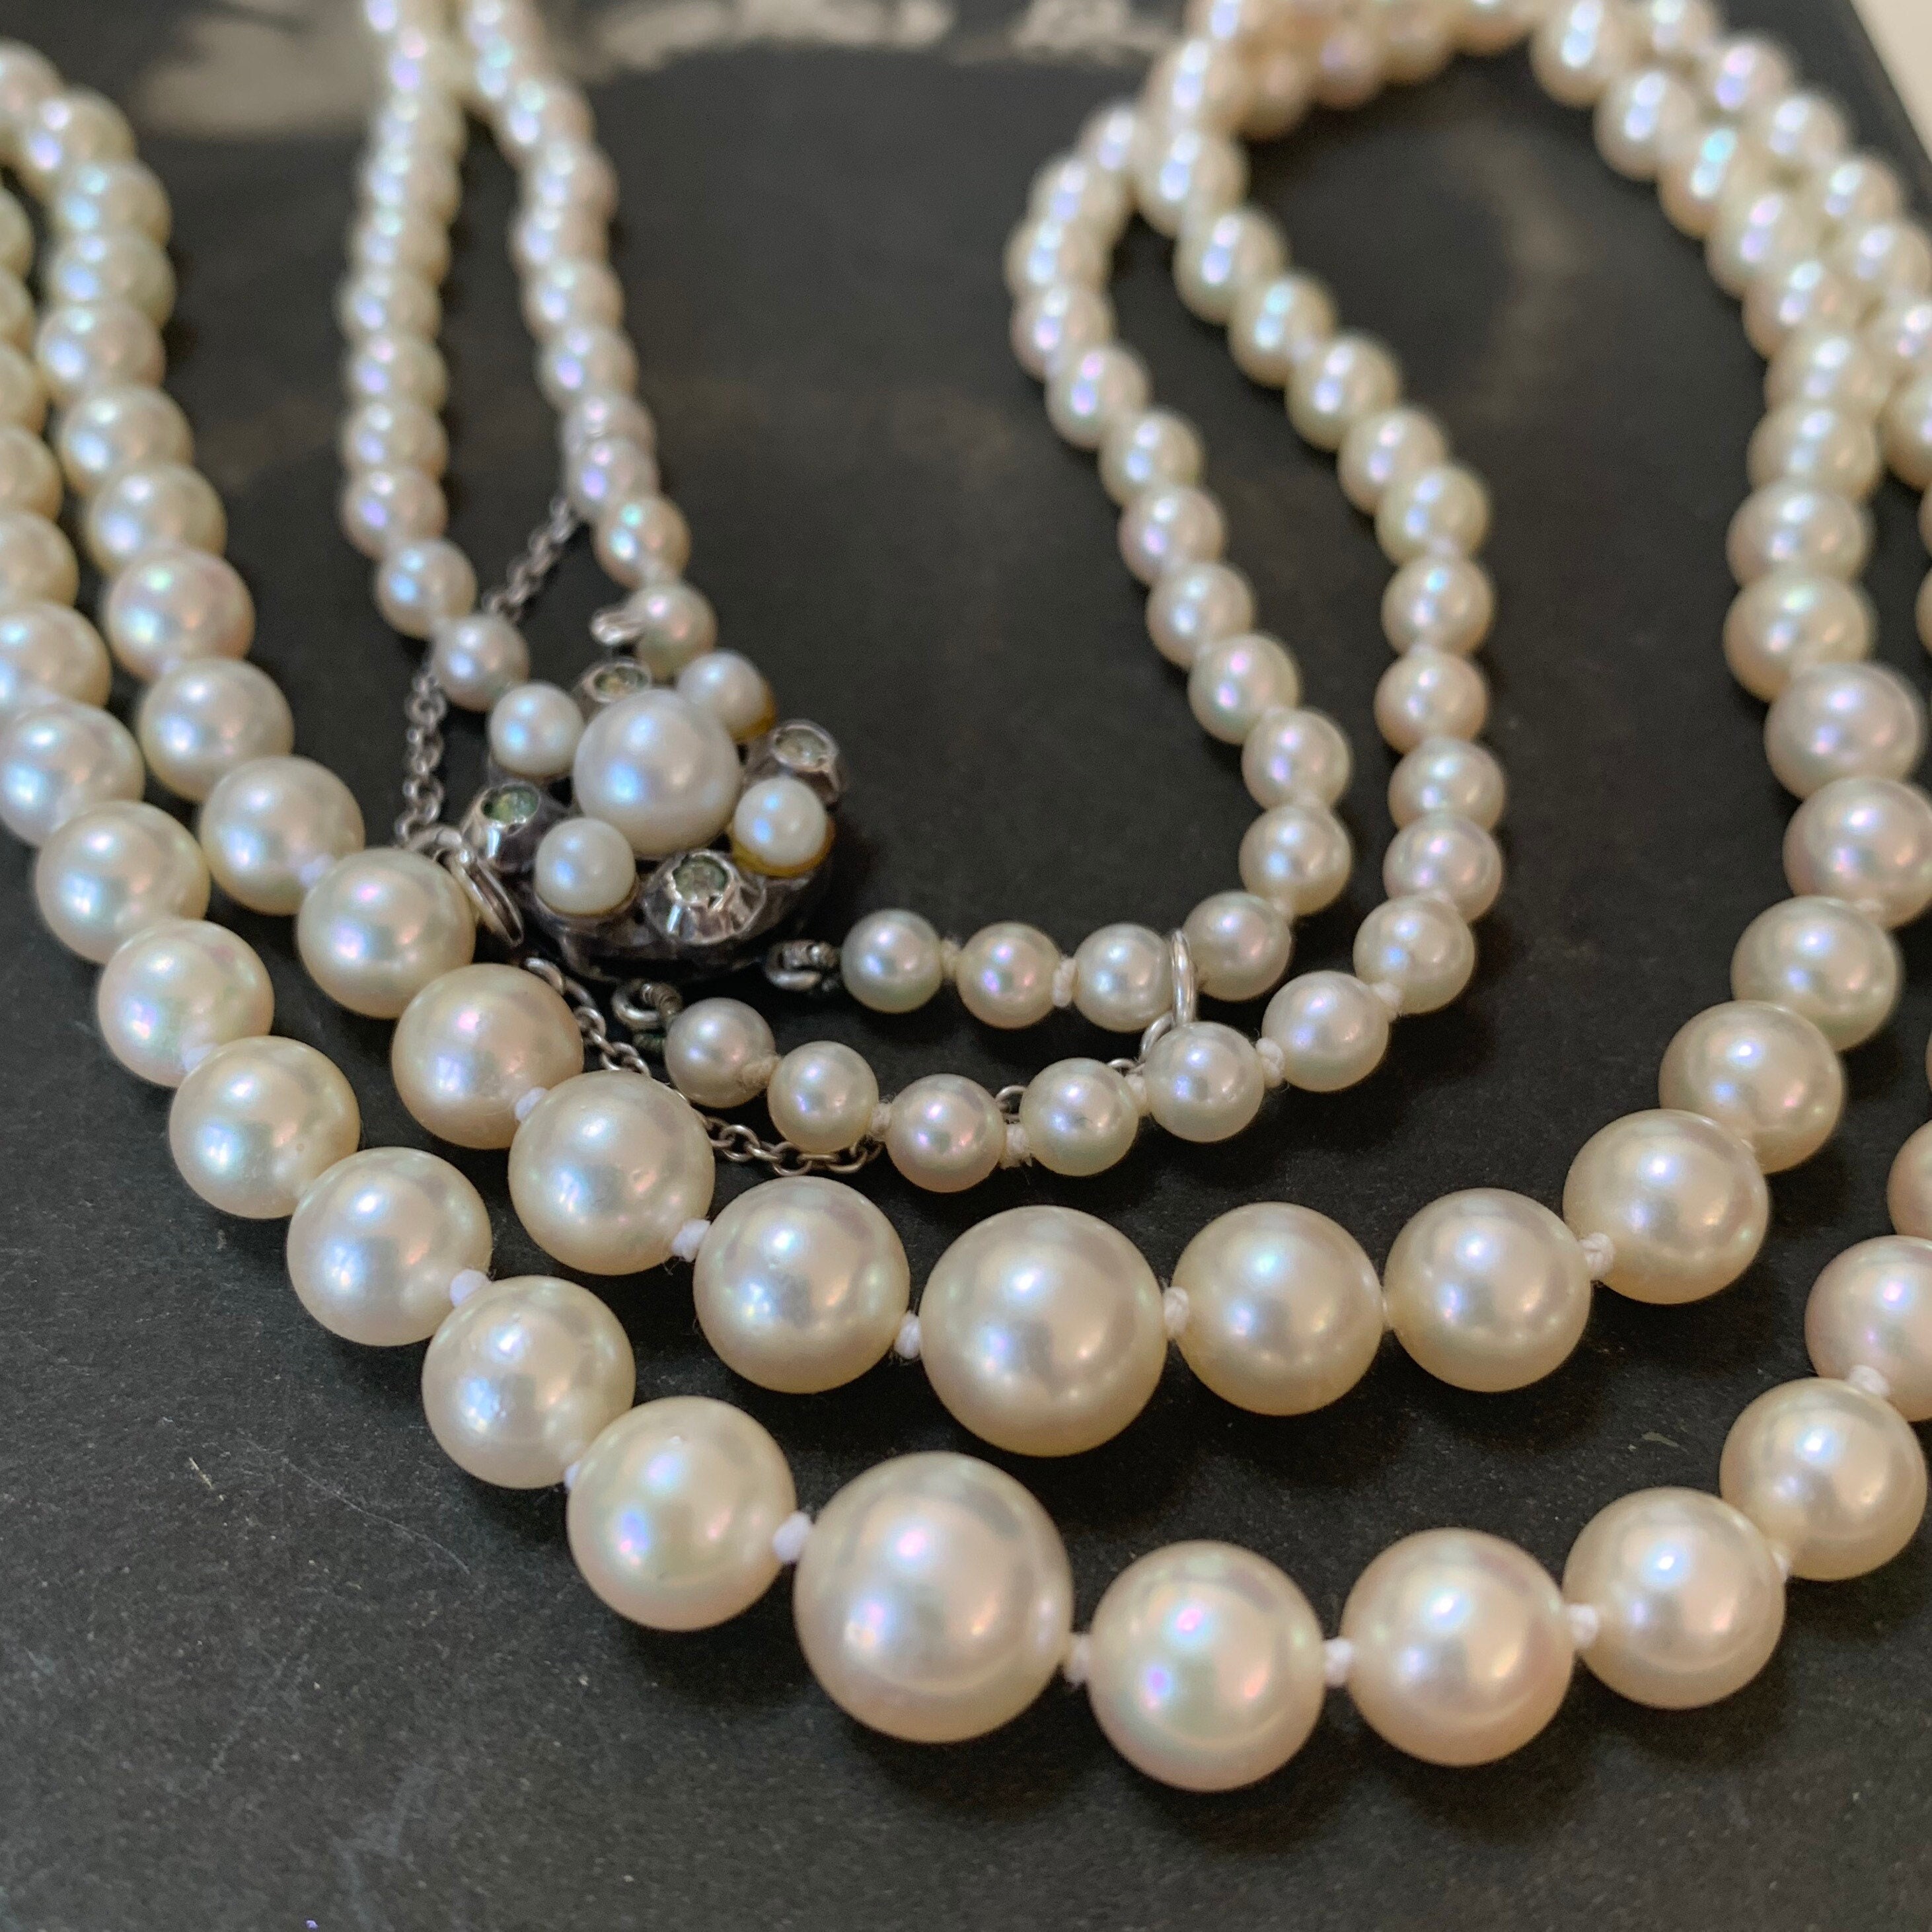 Antique Pearl Necklace 19 Inch Double Twin Strand Of Graduated Cultured Pearls Silver Pearl Paste Diamond Clasp